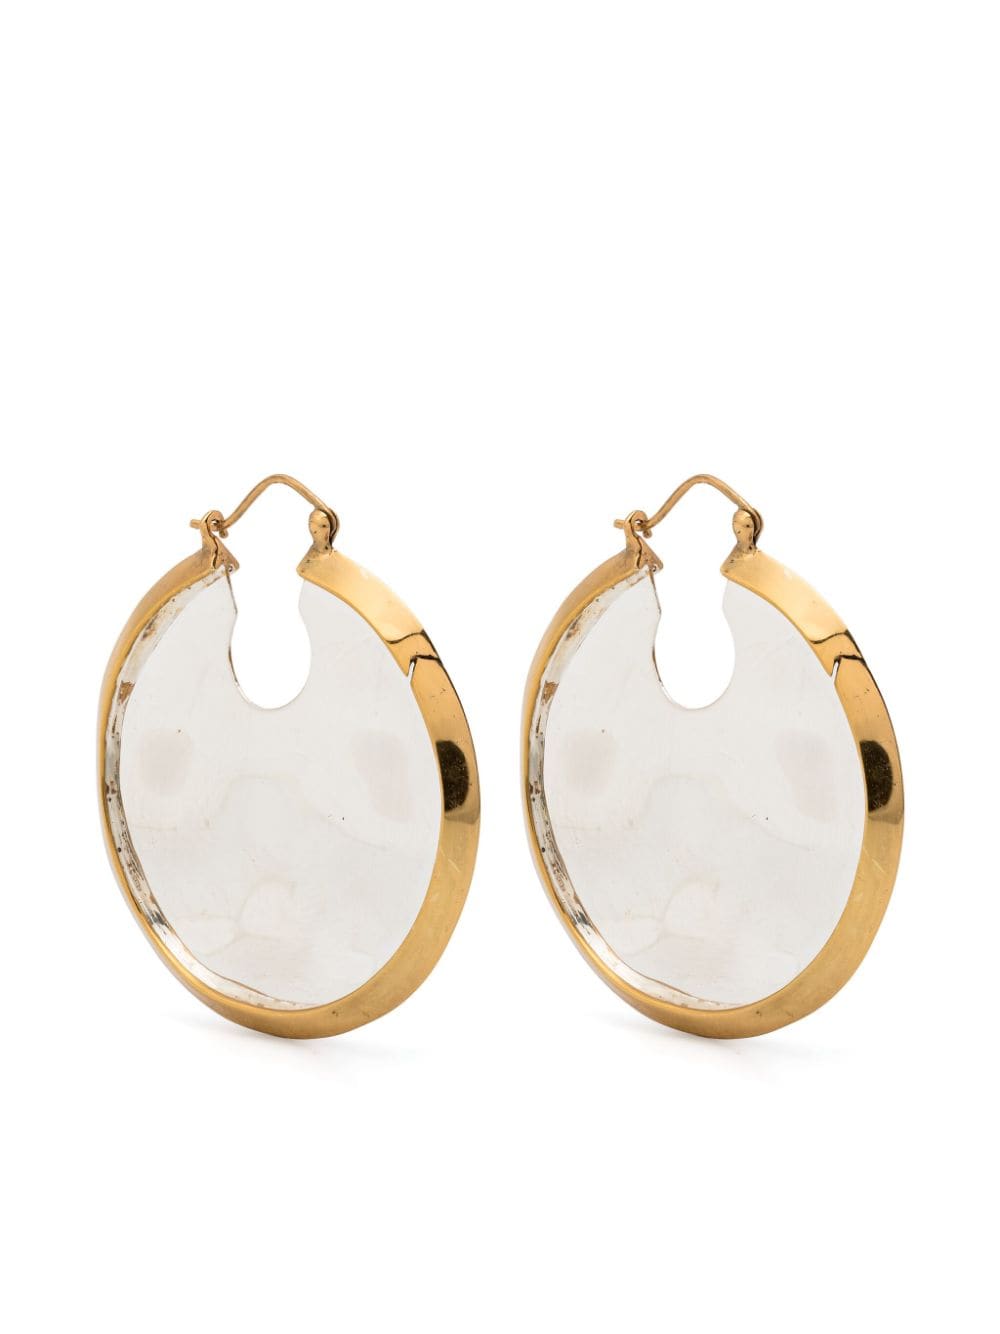 Patou hammered-effect hoop earrings - Gold von Patou